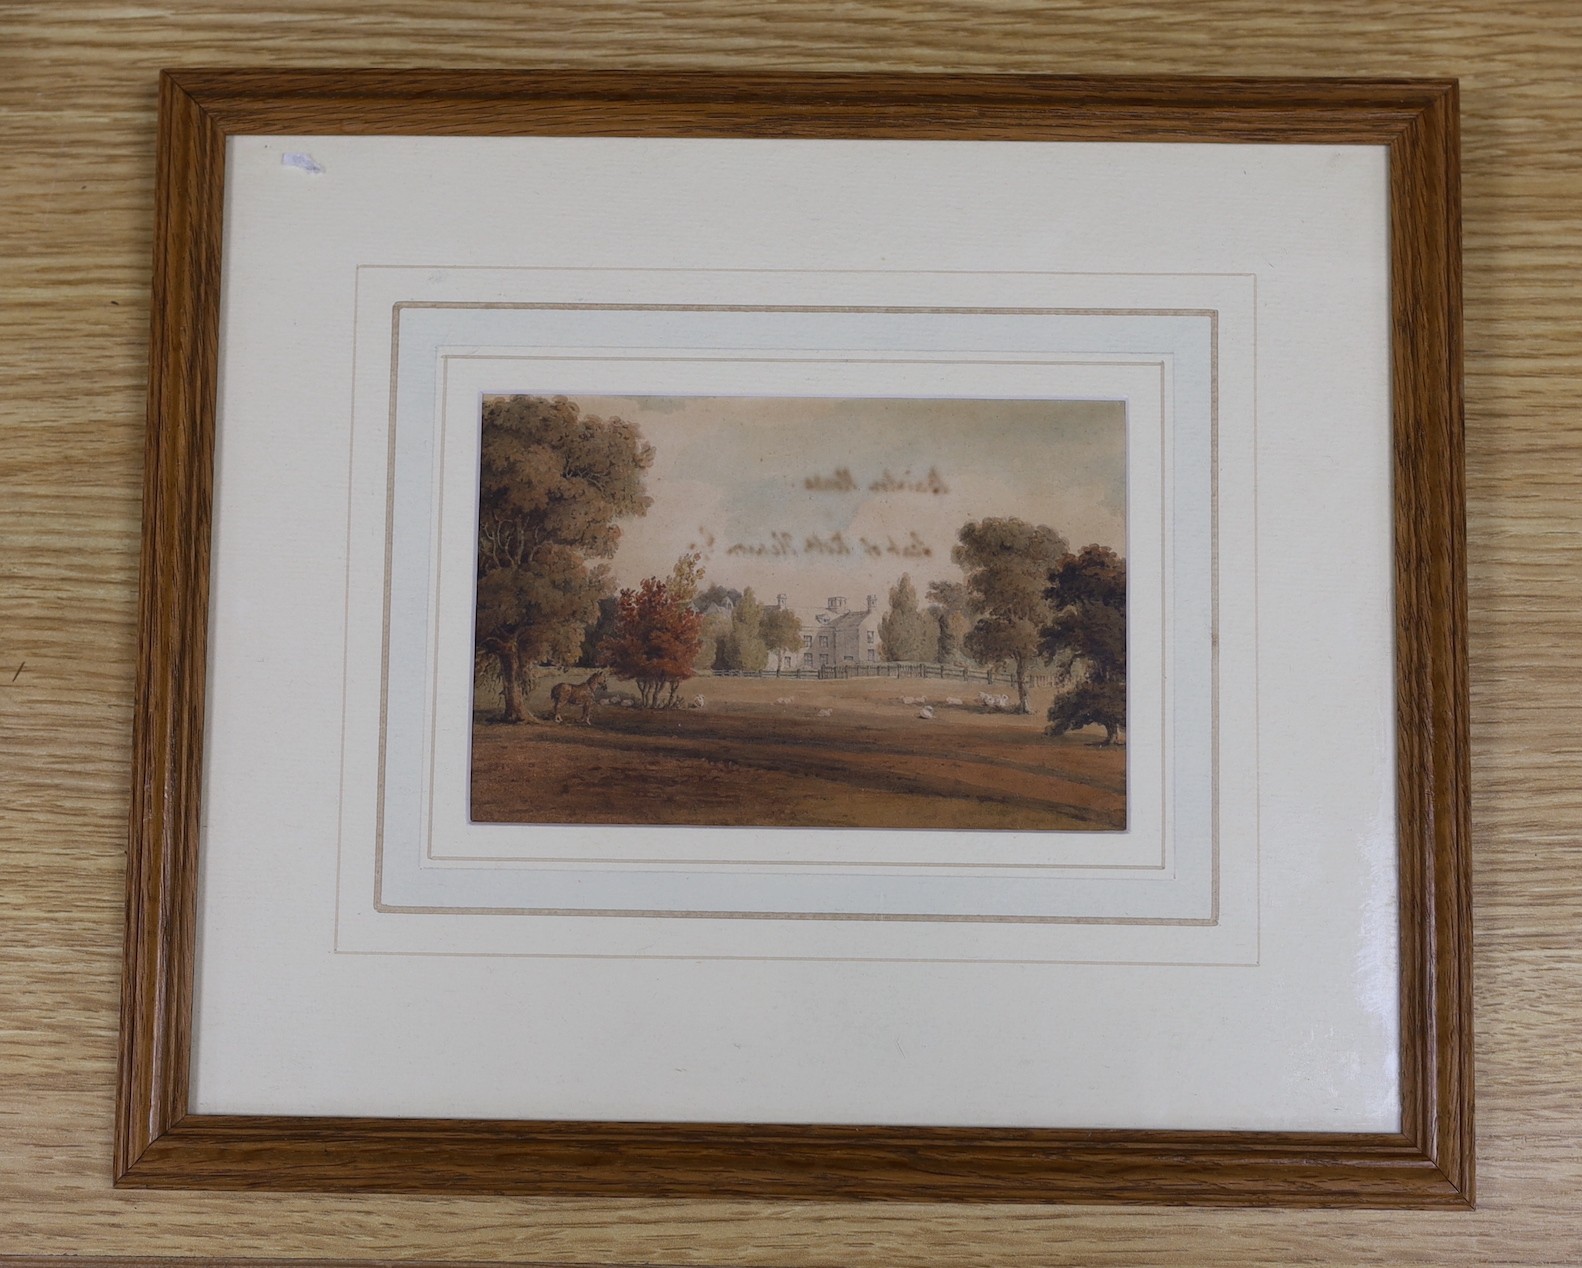 James Robert Thompson (19th C.), 'Bainton House, Cambridgeshire', pen and watercolour, signed and inscribed on verso, 10 x 15.25cm